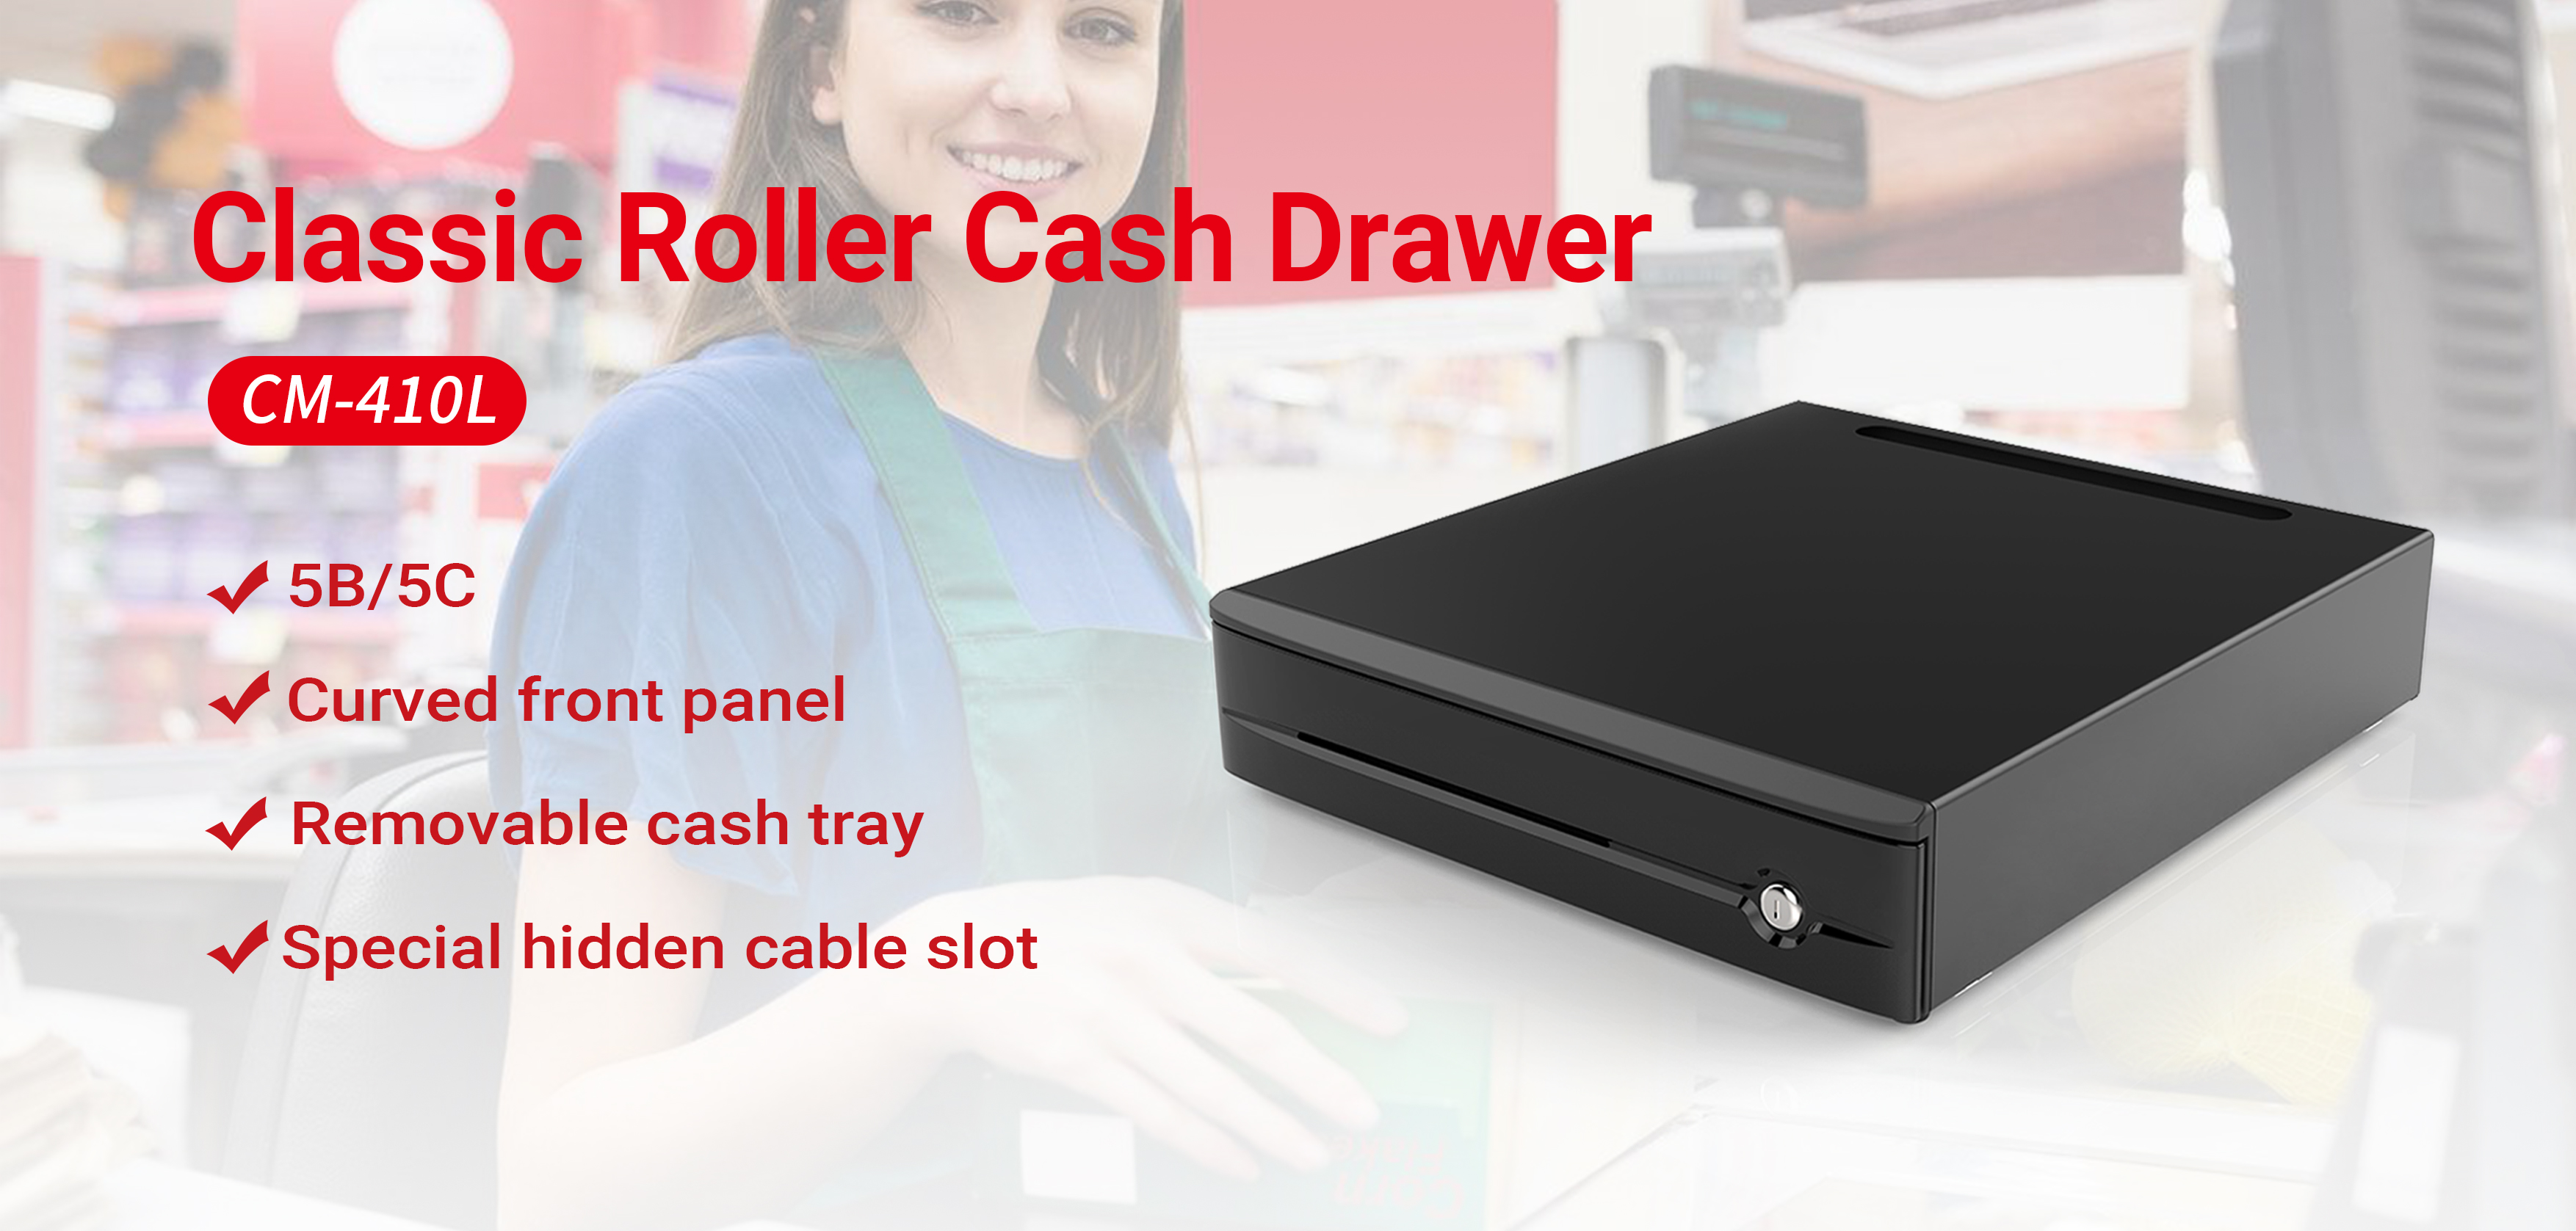 Classic roller cash drawer cm-410l makes wiring invisible 